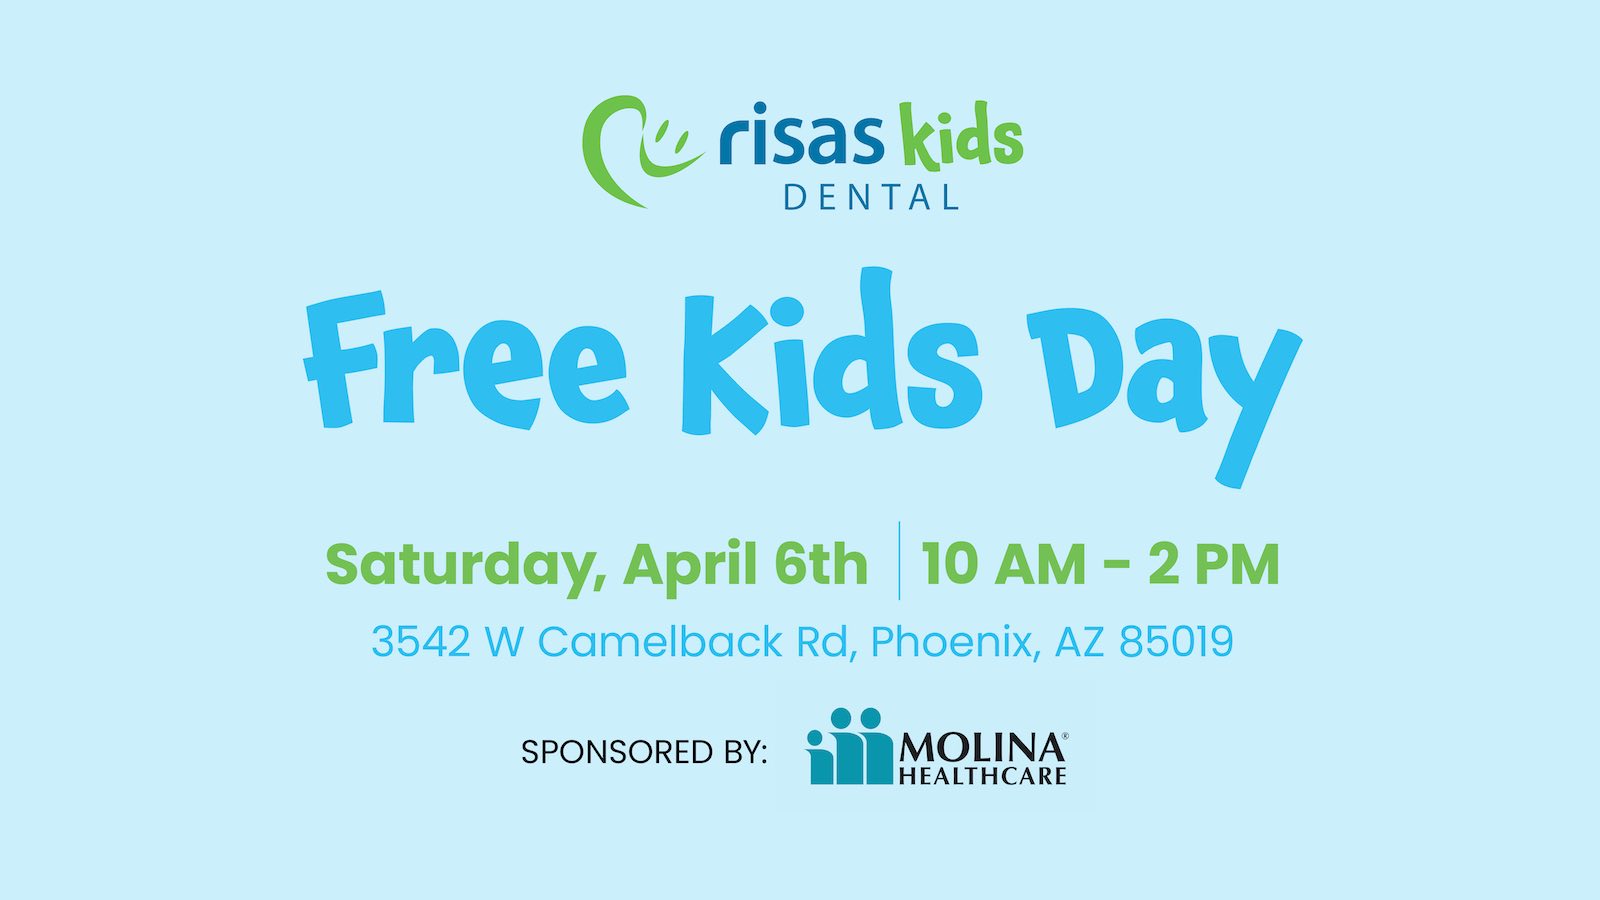 Kids Day event